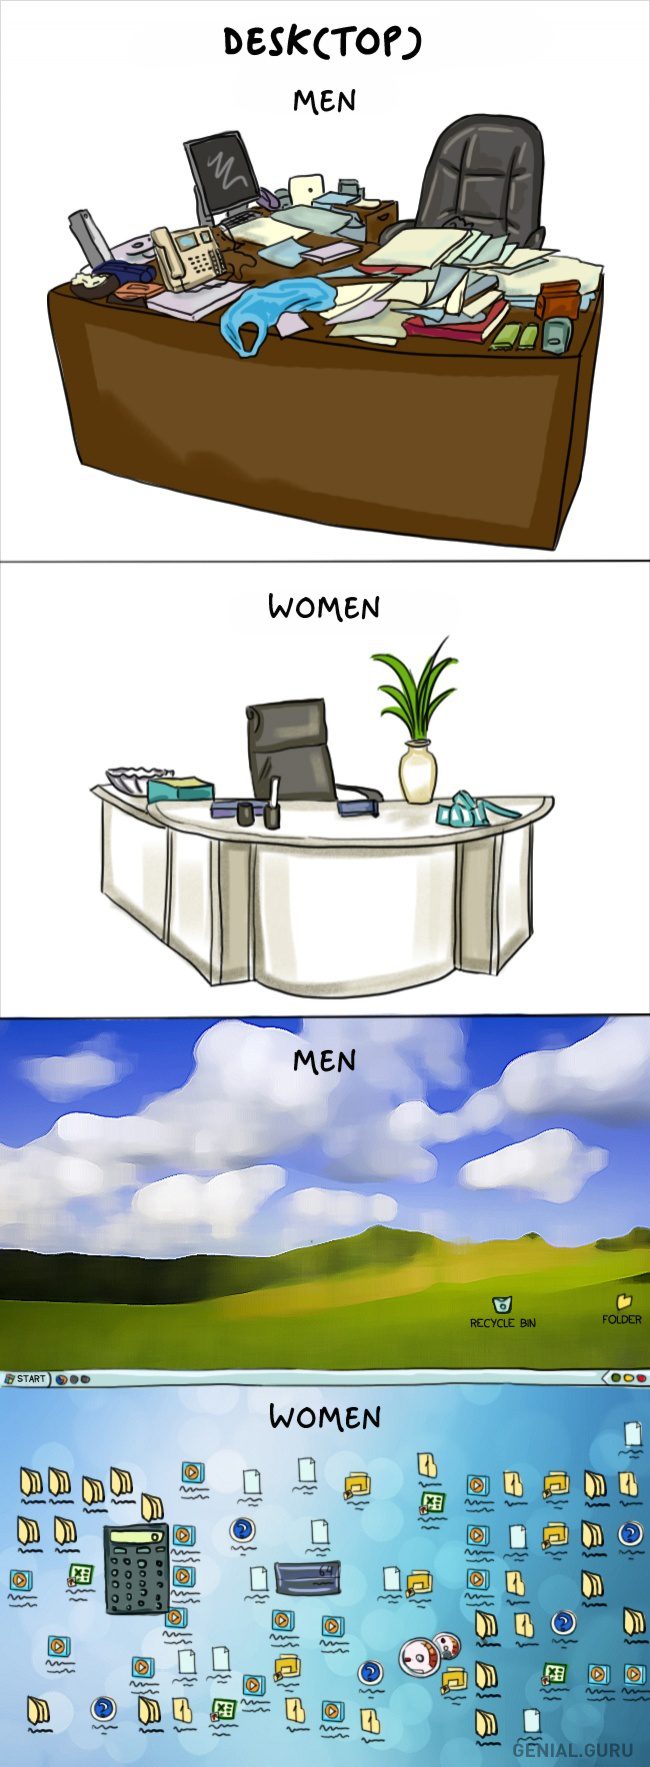 men women difference 8